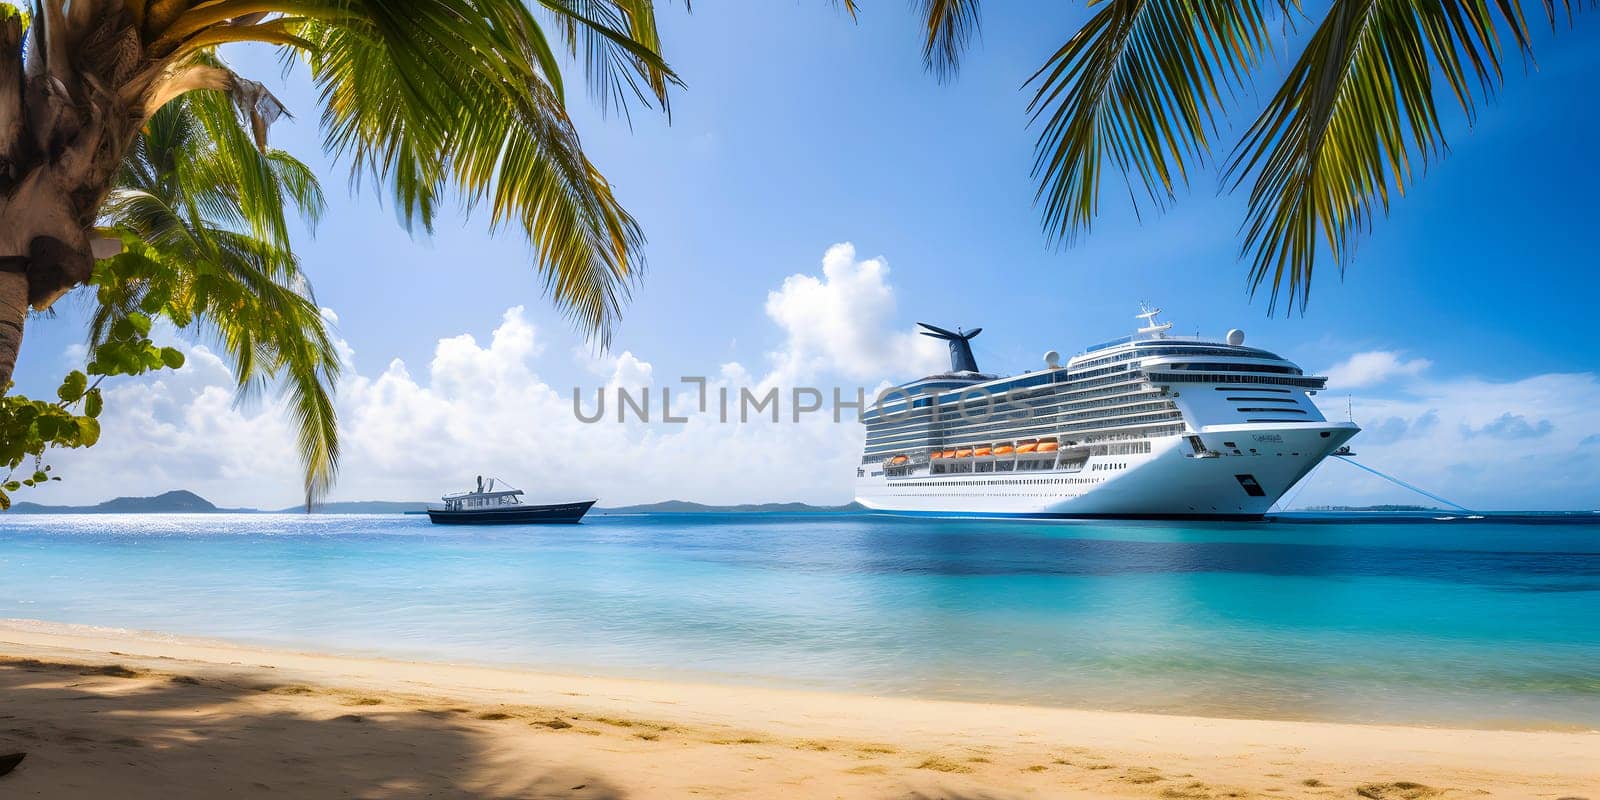 Large cruise liner in the background with a palm tree on white sand coral beach. Neural network generated in May 2023. Not based on any actual person, scene or pattern.